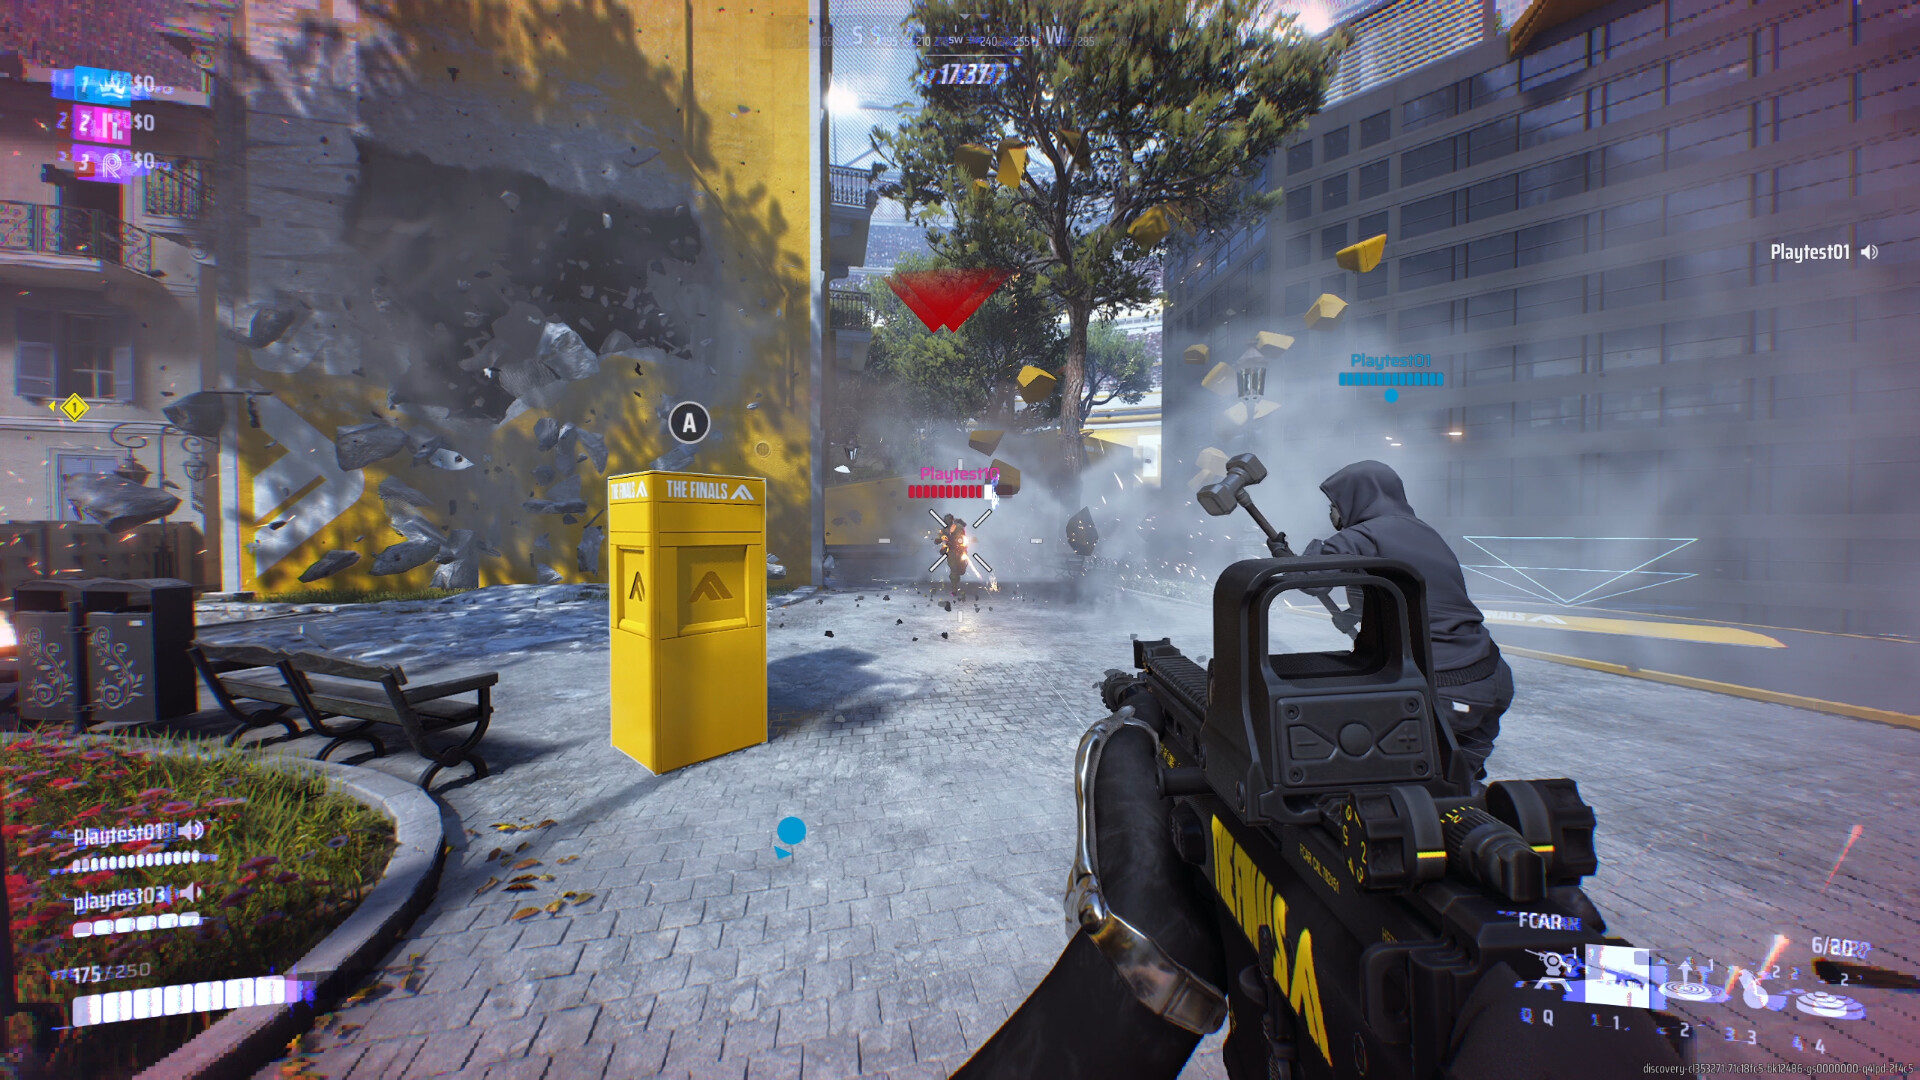 Destructive first-person shooter gameplay from The Finals.